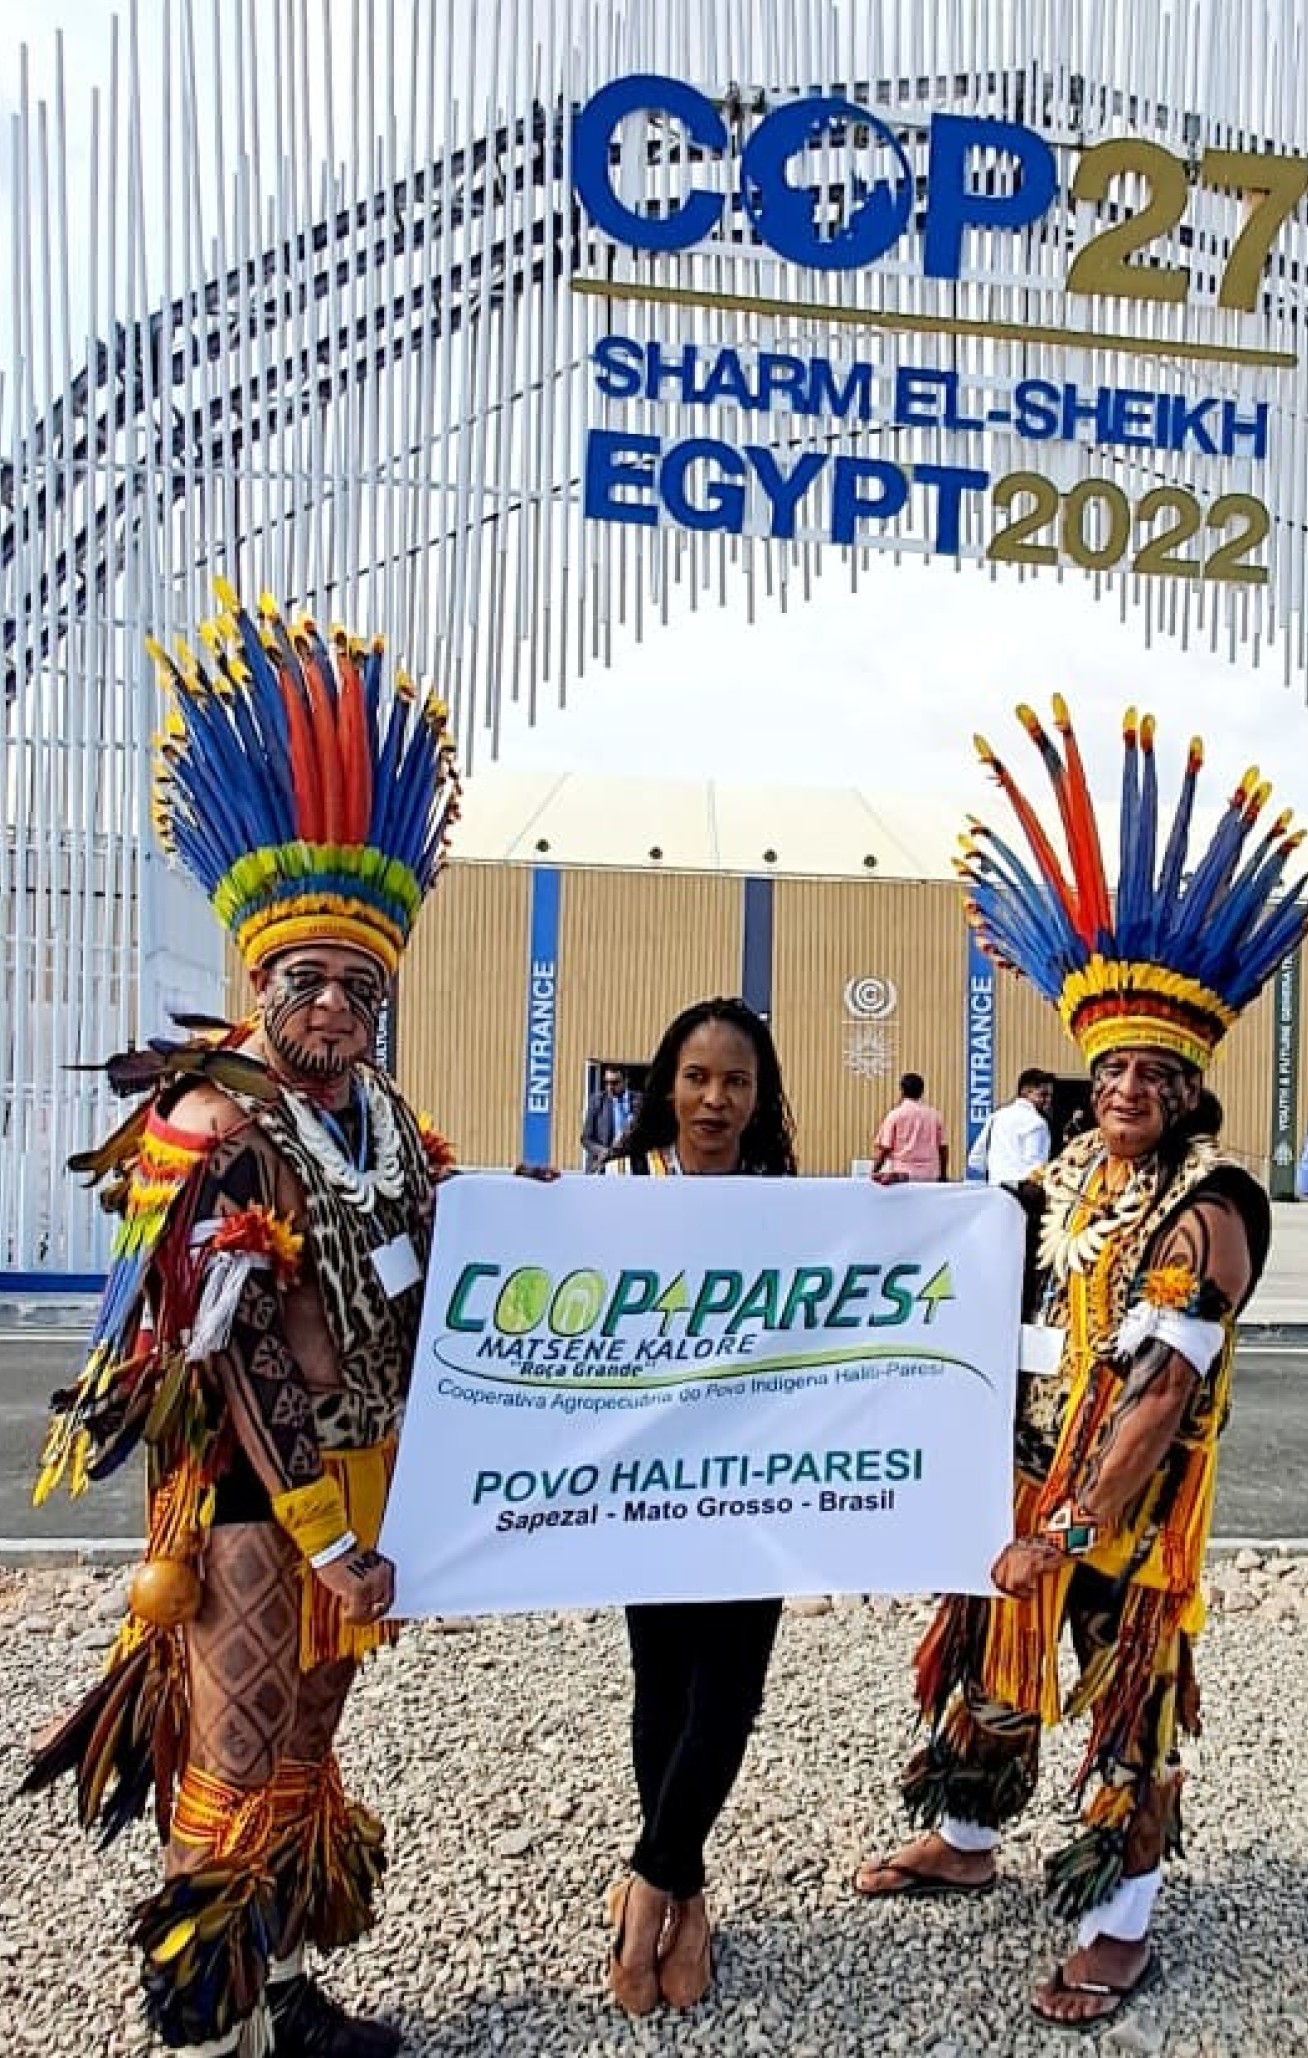 Three people stand outside a conference venue, two are wearing traditional outfits of Indigenous people of Brazil, they hold up a sign in Portuguese